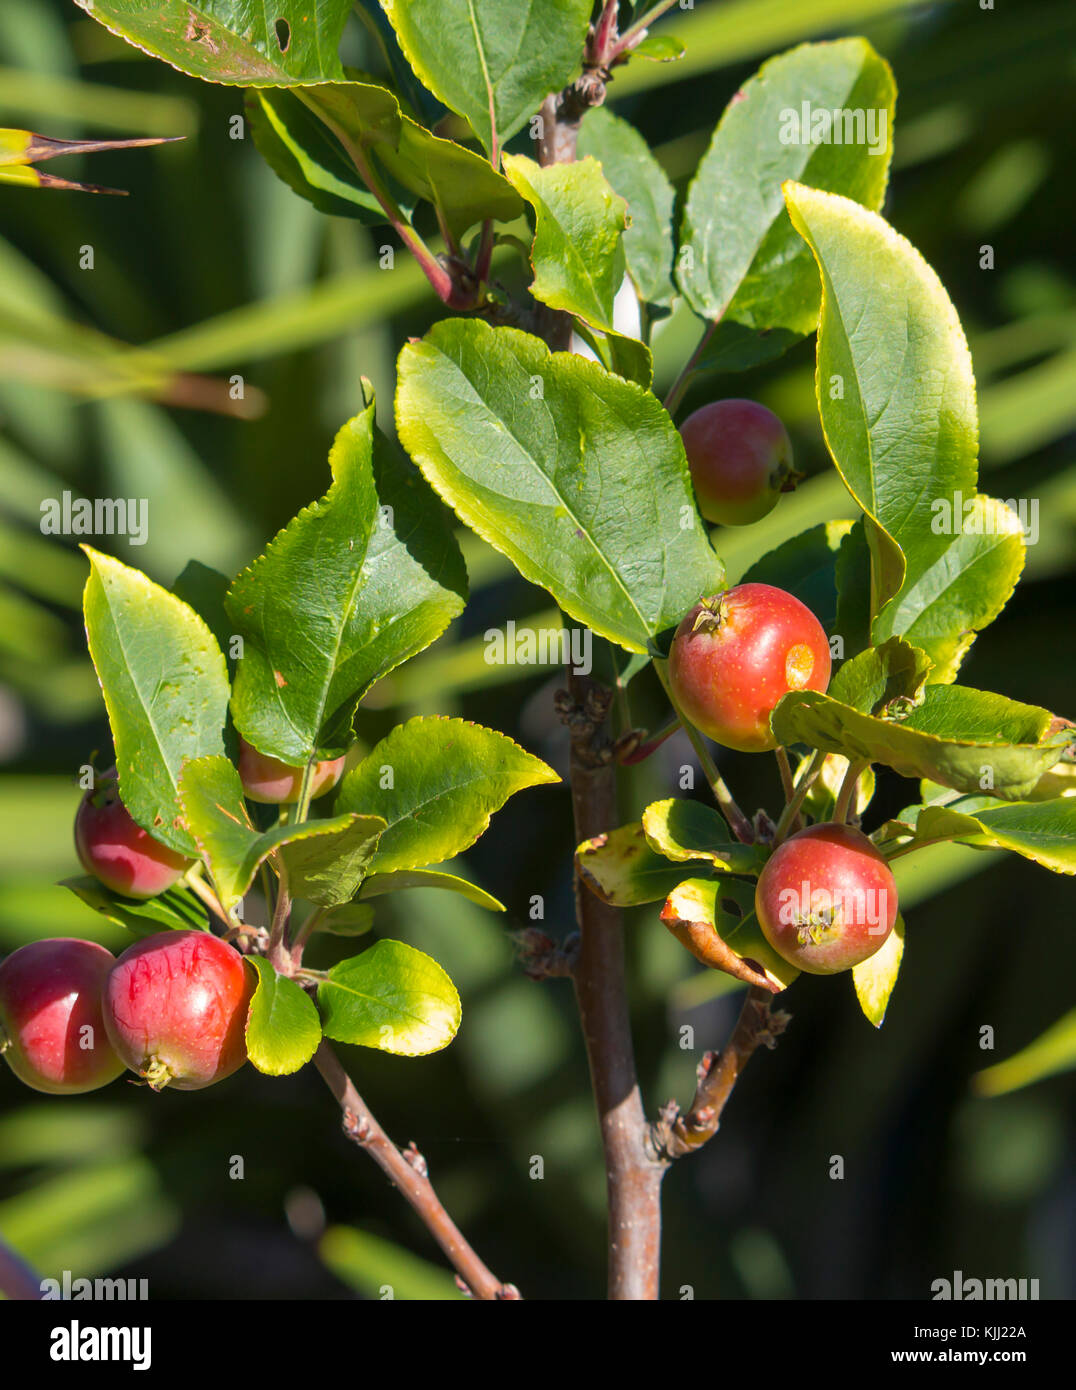 Malus  a genus of 30 to 55 species of small deciduous apple trees or shrubs in the family Rosaceae,  wild crabapple being a  tree  with red fruit. Stock Photo